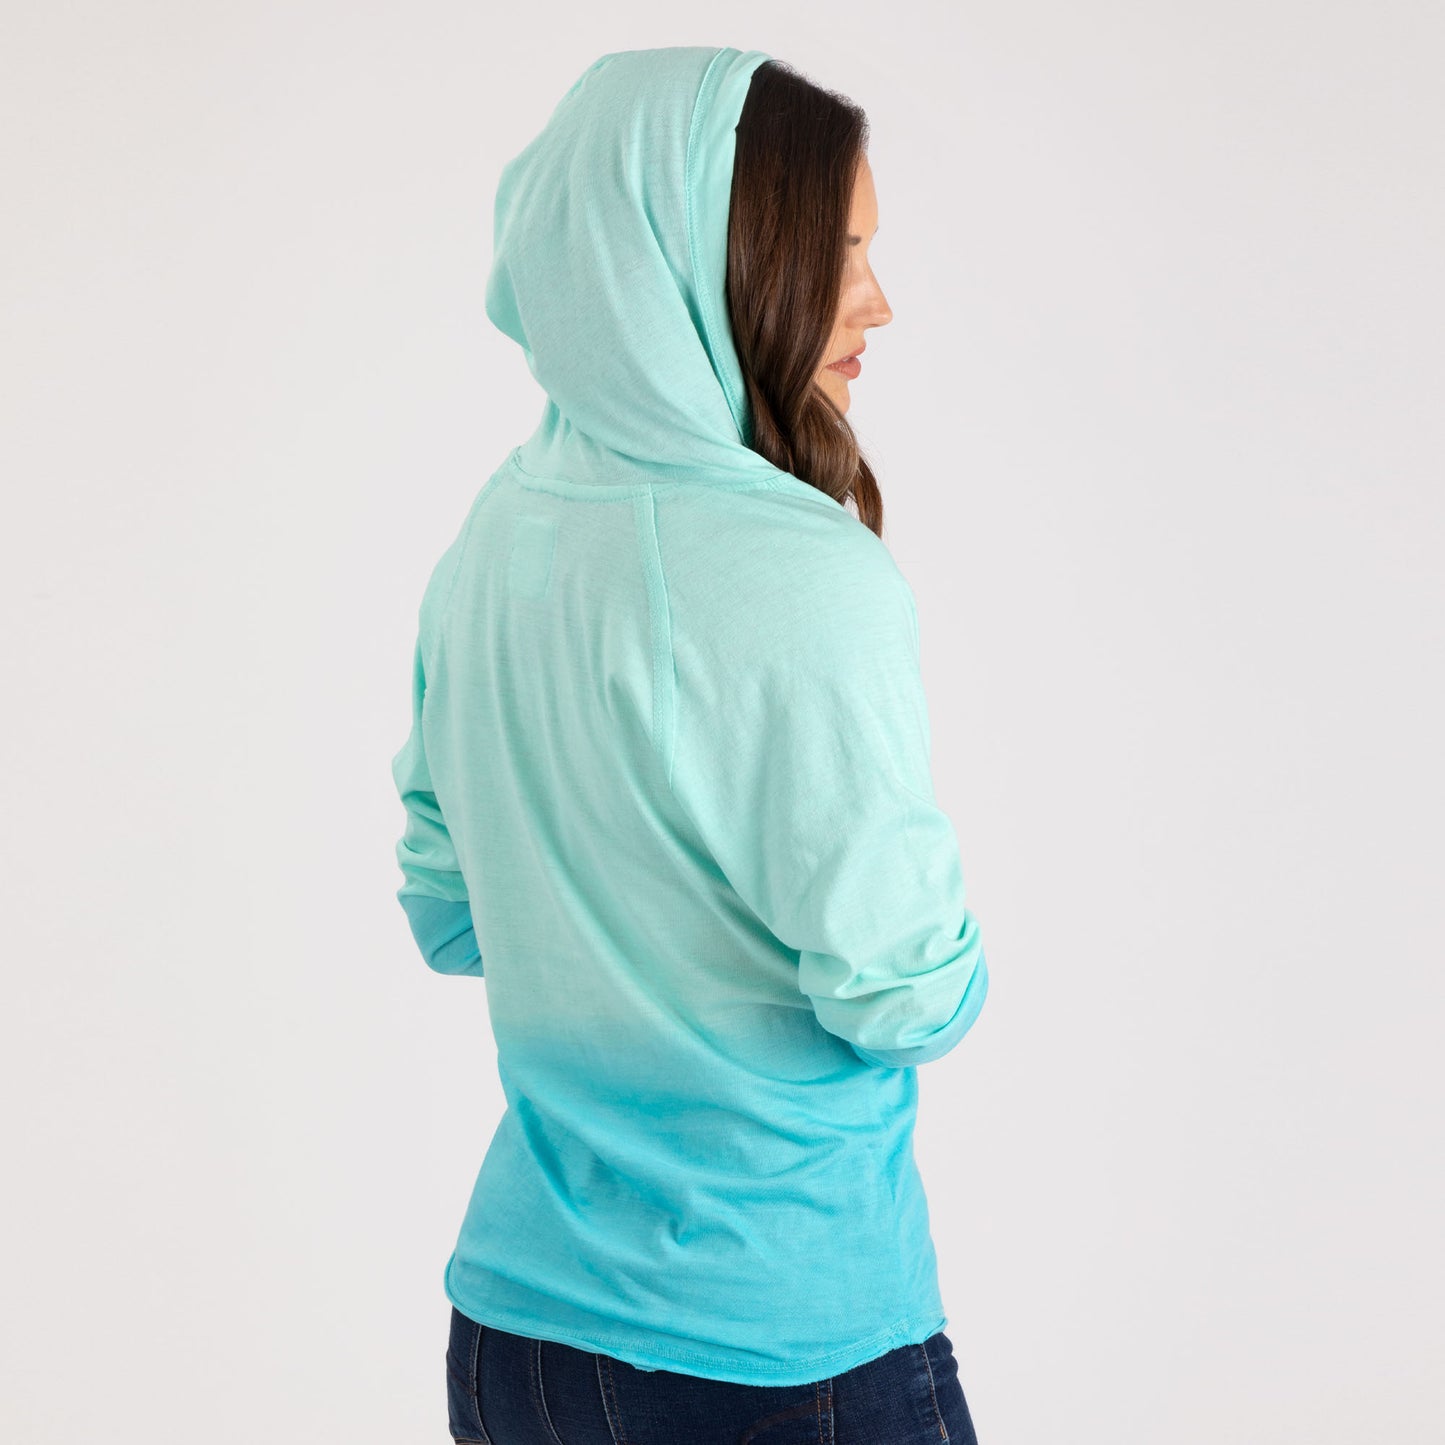 Paw Print Ombre Hooded Tunic